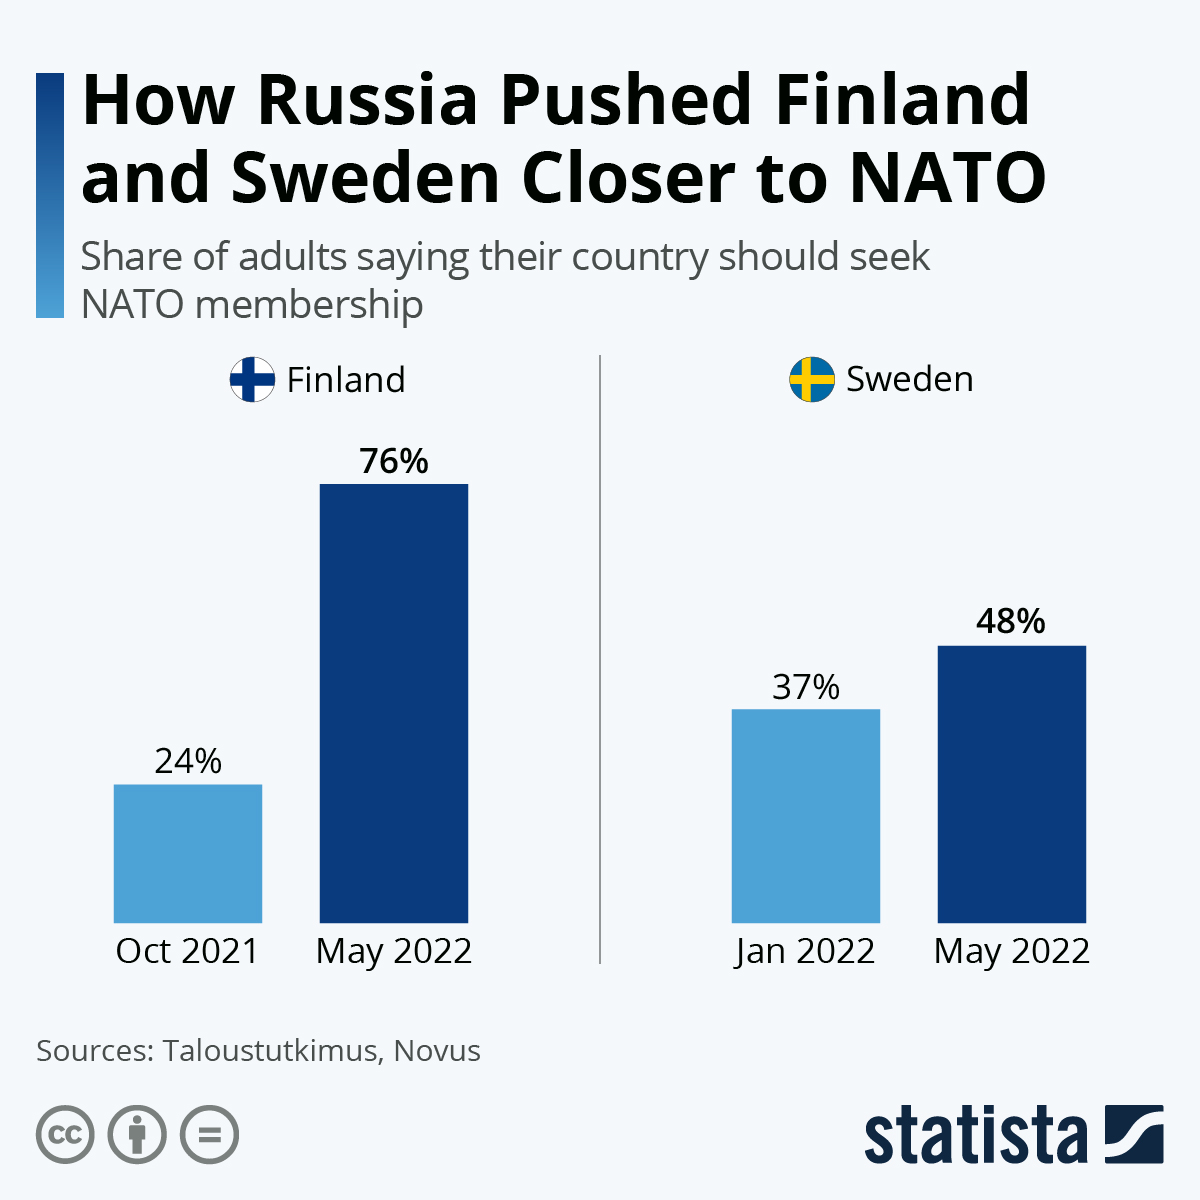 How Russia's War Pushed Finland and Sweden Closer to NATO